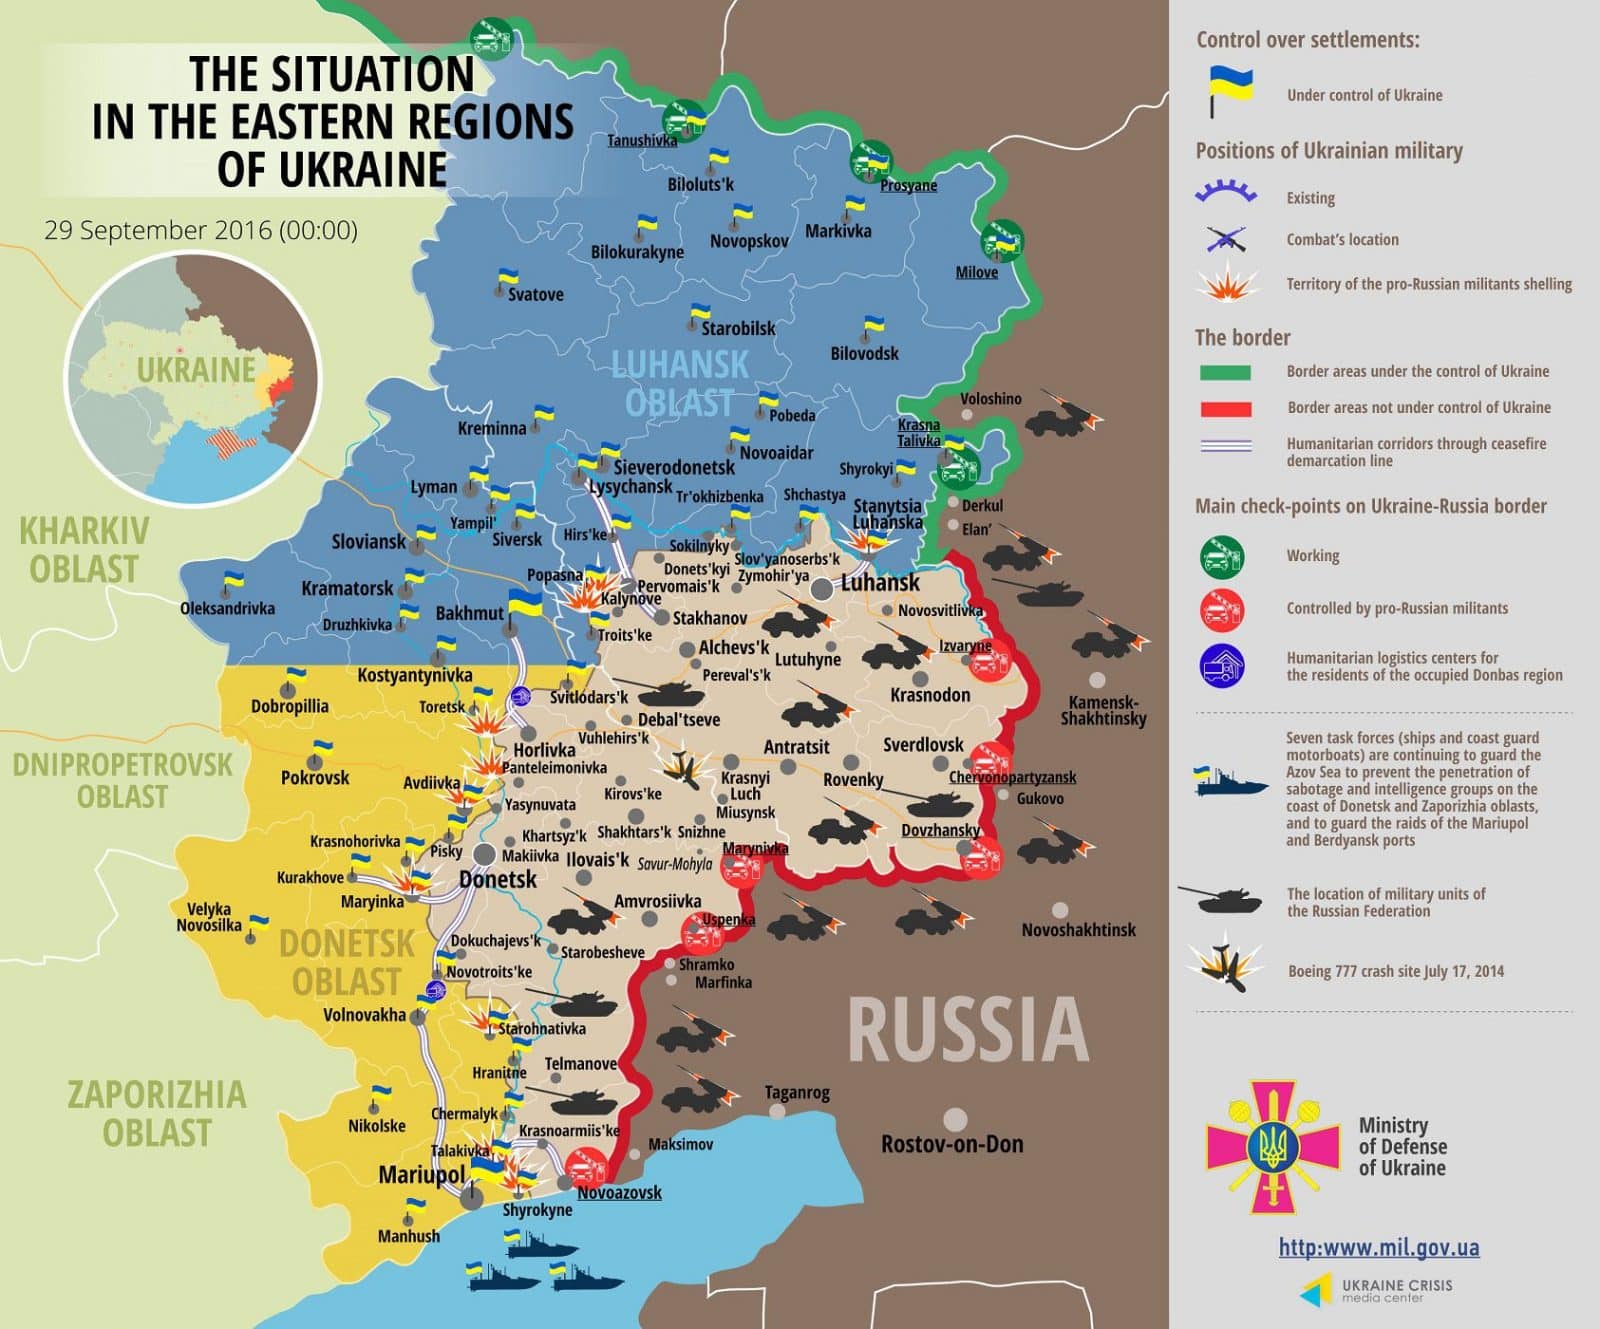 ”Ceasefire” in Donbas: Russian proxies attack Ukraine 25 times in last day